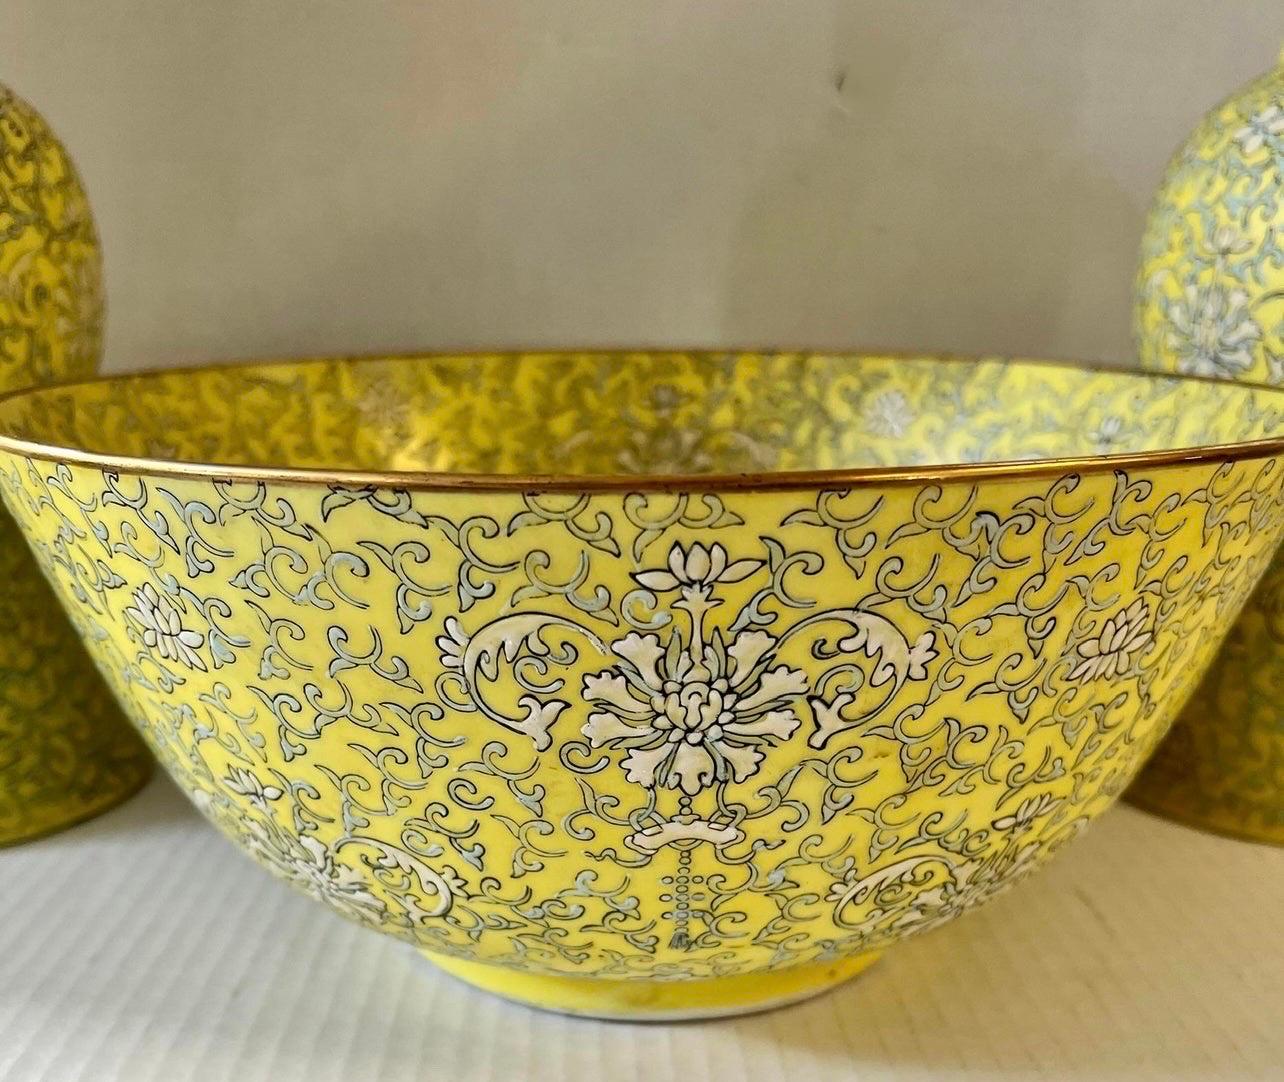 Stunning set of three pieces, two vases and own bowl, all with rare yellow, blue and white color scheme from Japan. Still in very good condition. The dimensions for the vases are below and the bowl has a diameter of 12